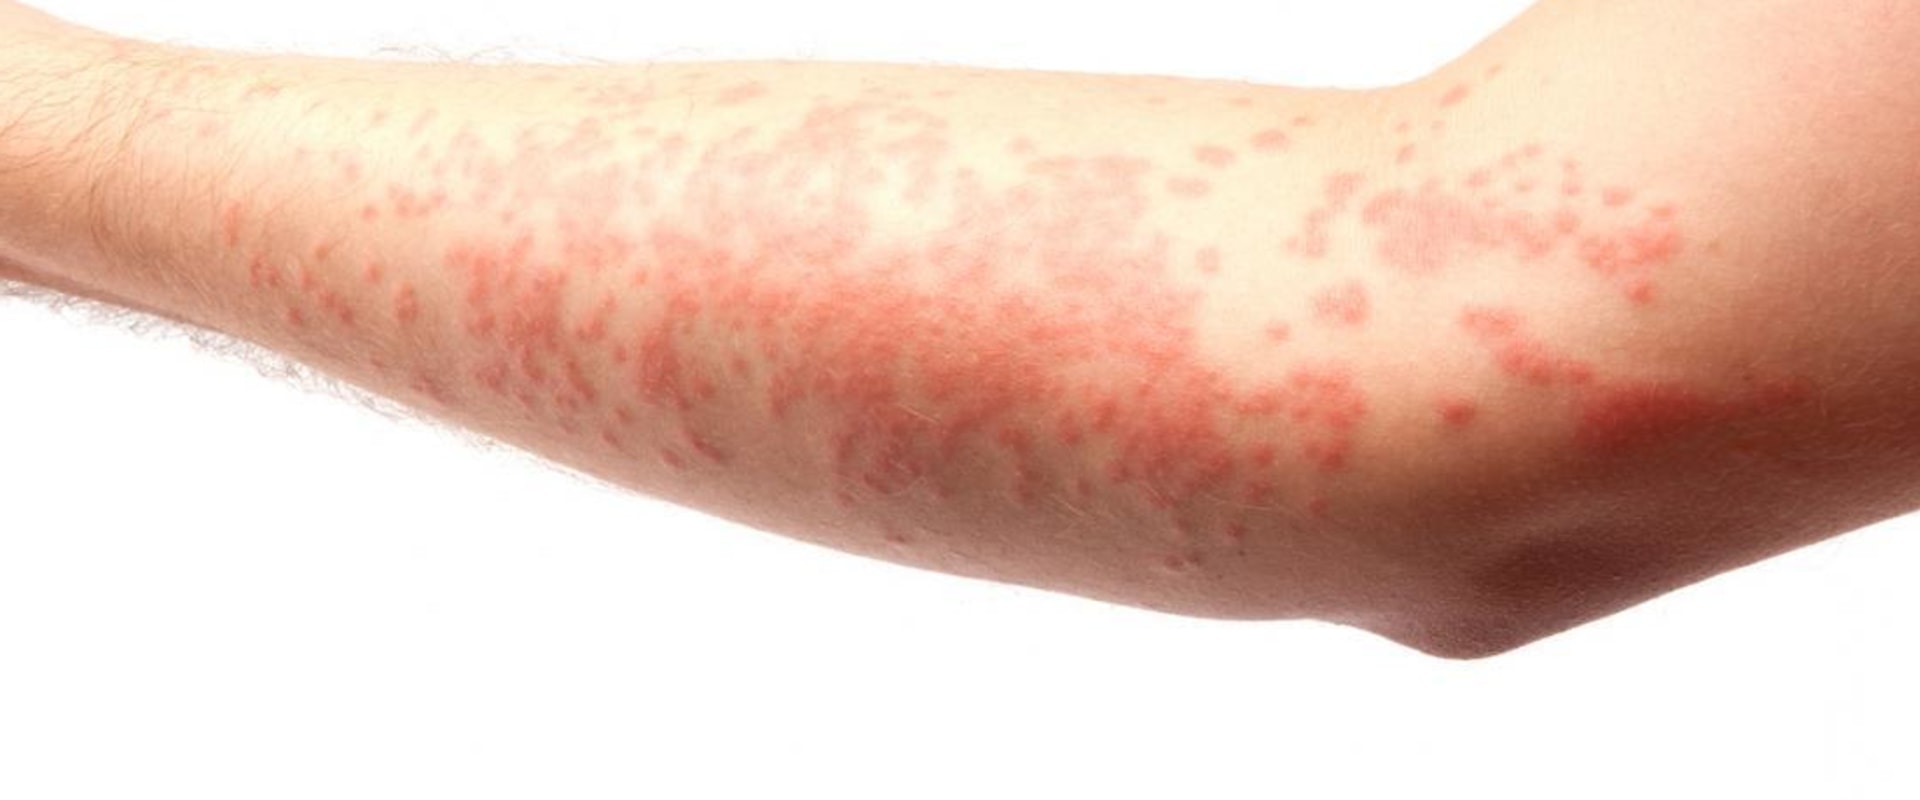 Skin Rashes: Causes, Symptoms, and Treatment